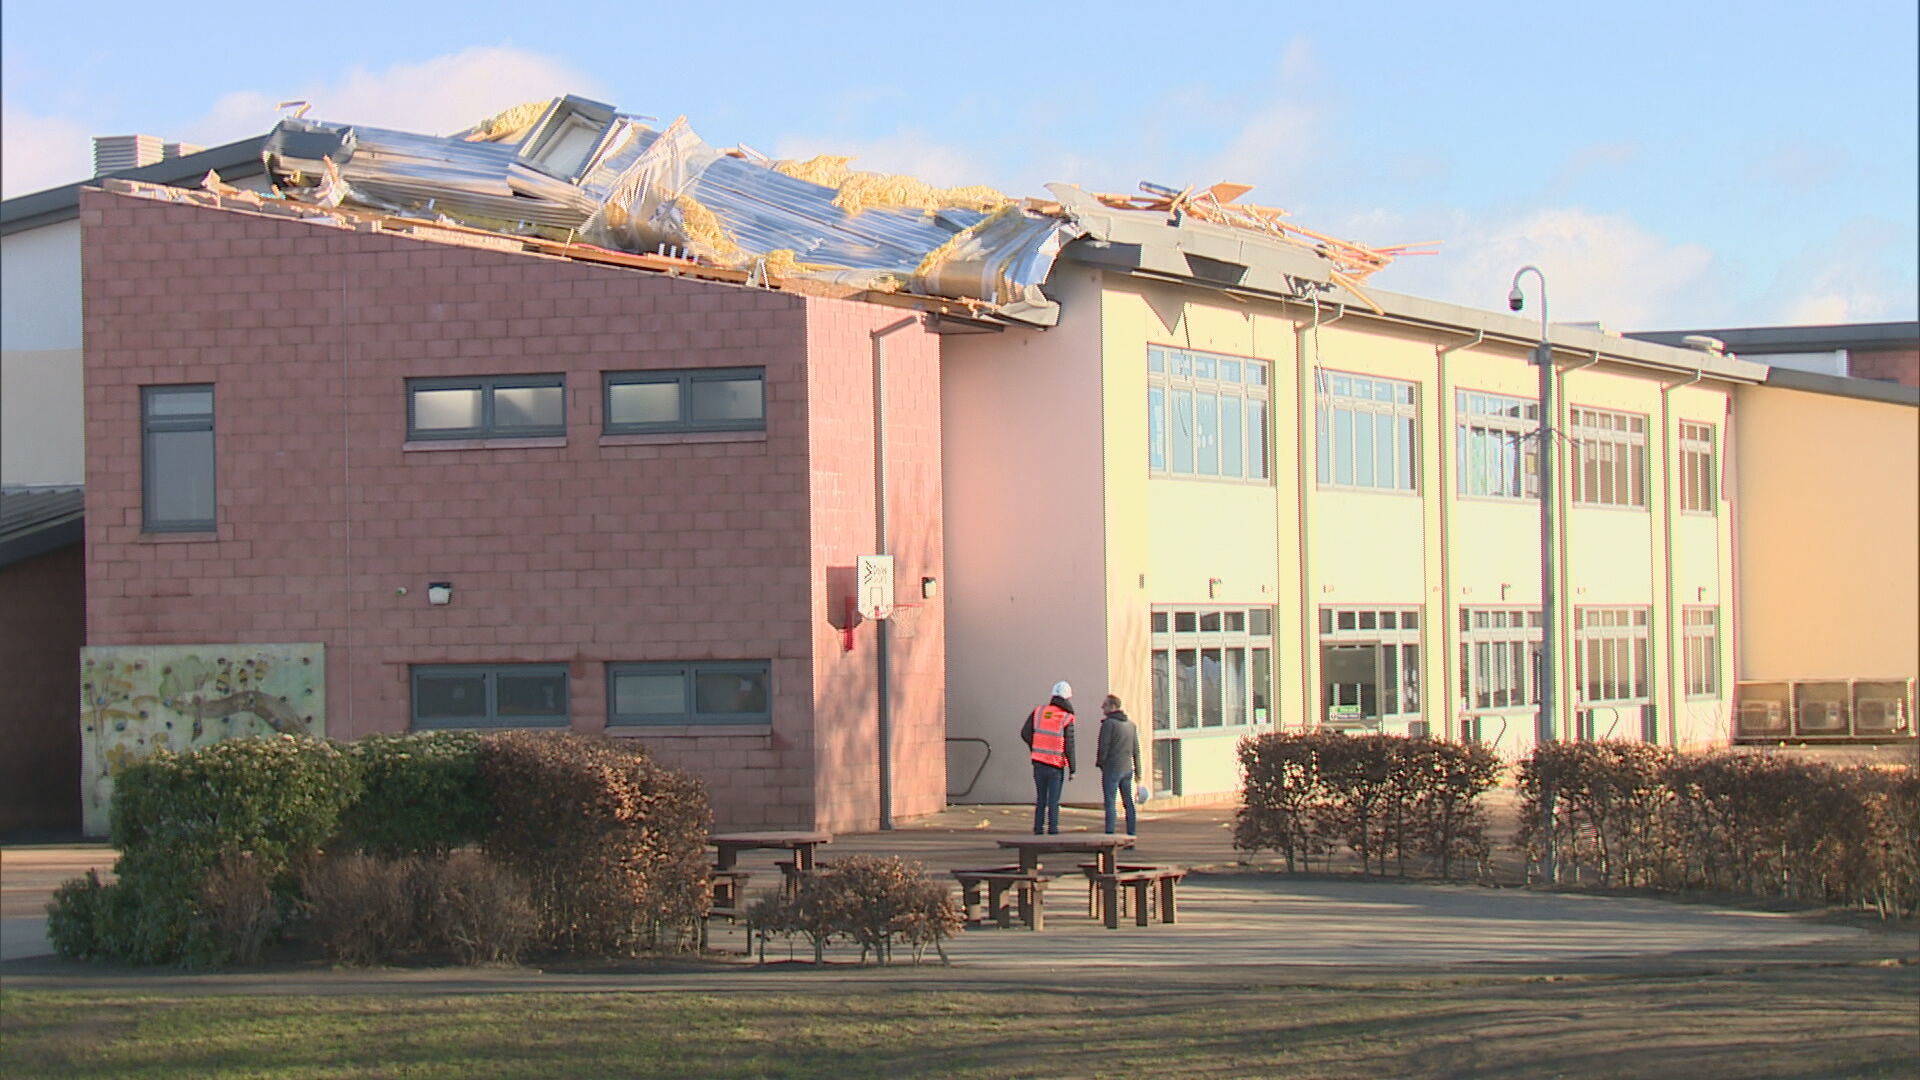 Roof of a building is seen partially torn off by strong winds.